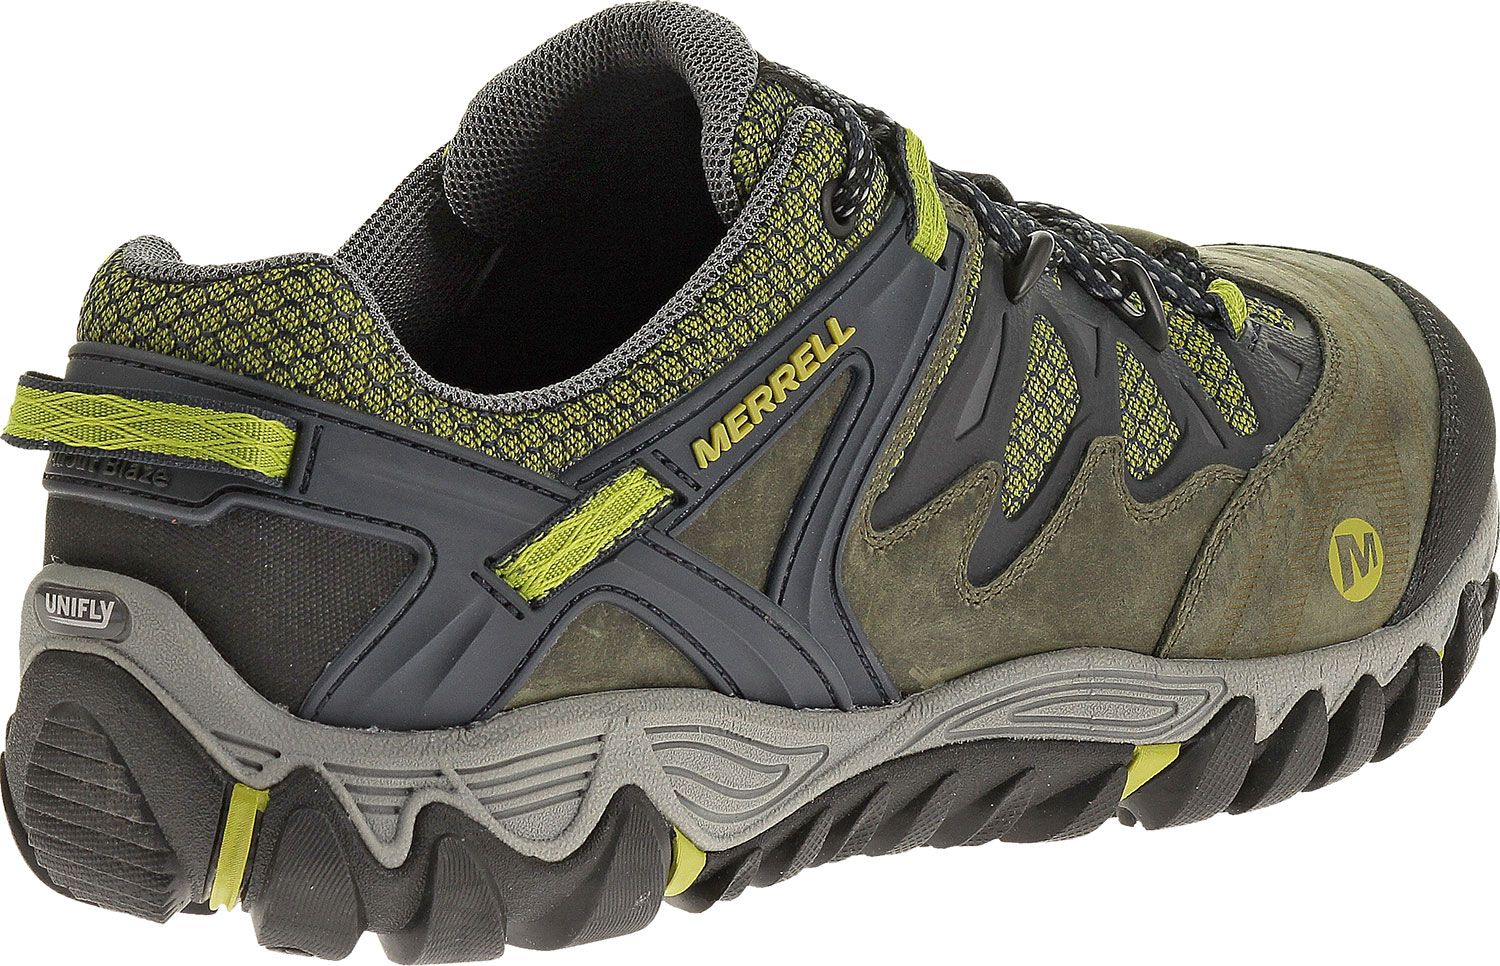 Merrell All Out Blaze Mens Hiking Shoes